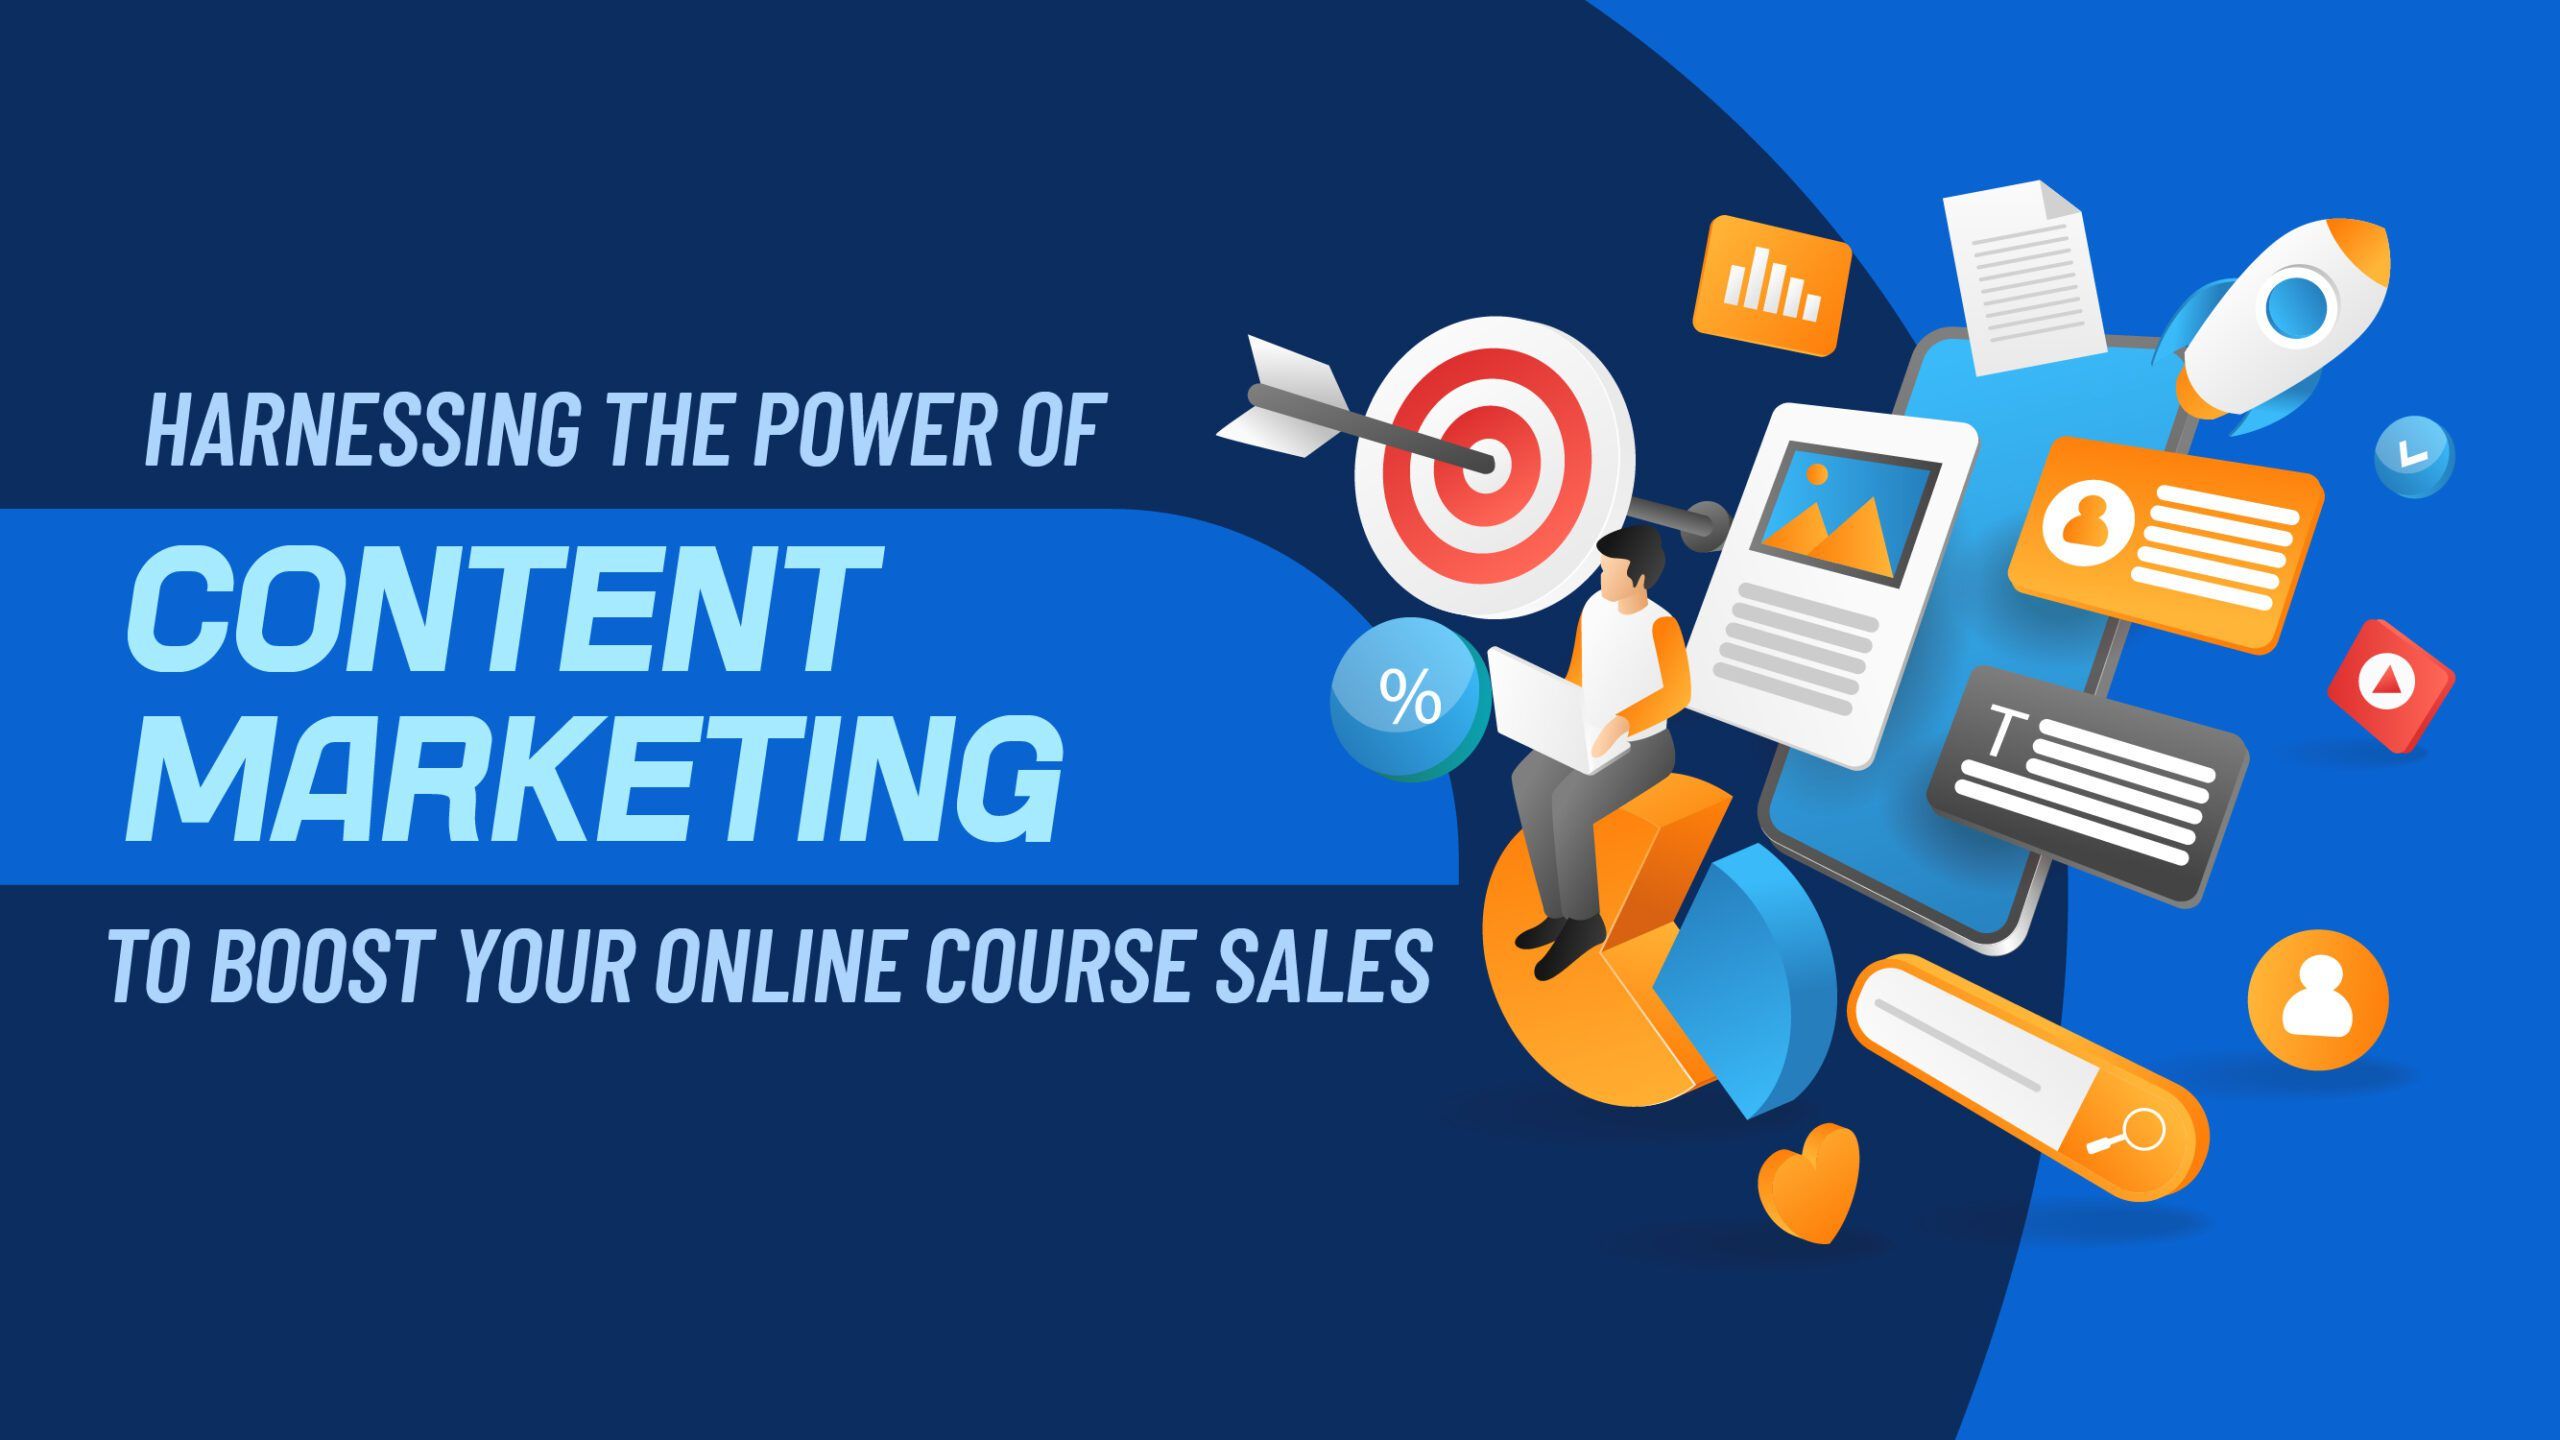 Harnessing the Power of Content Marketing to Boost Your Online Course Sales